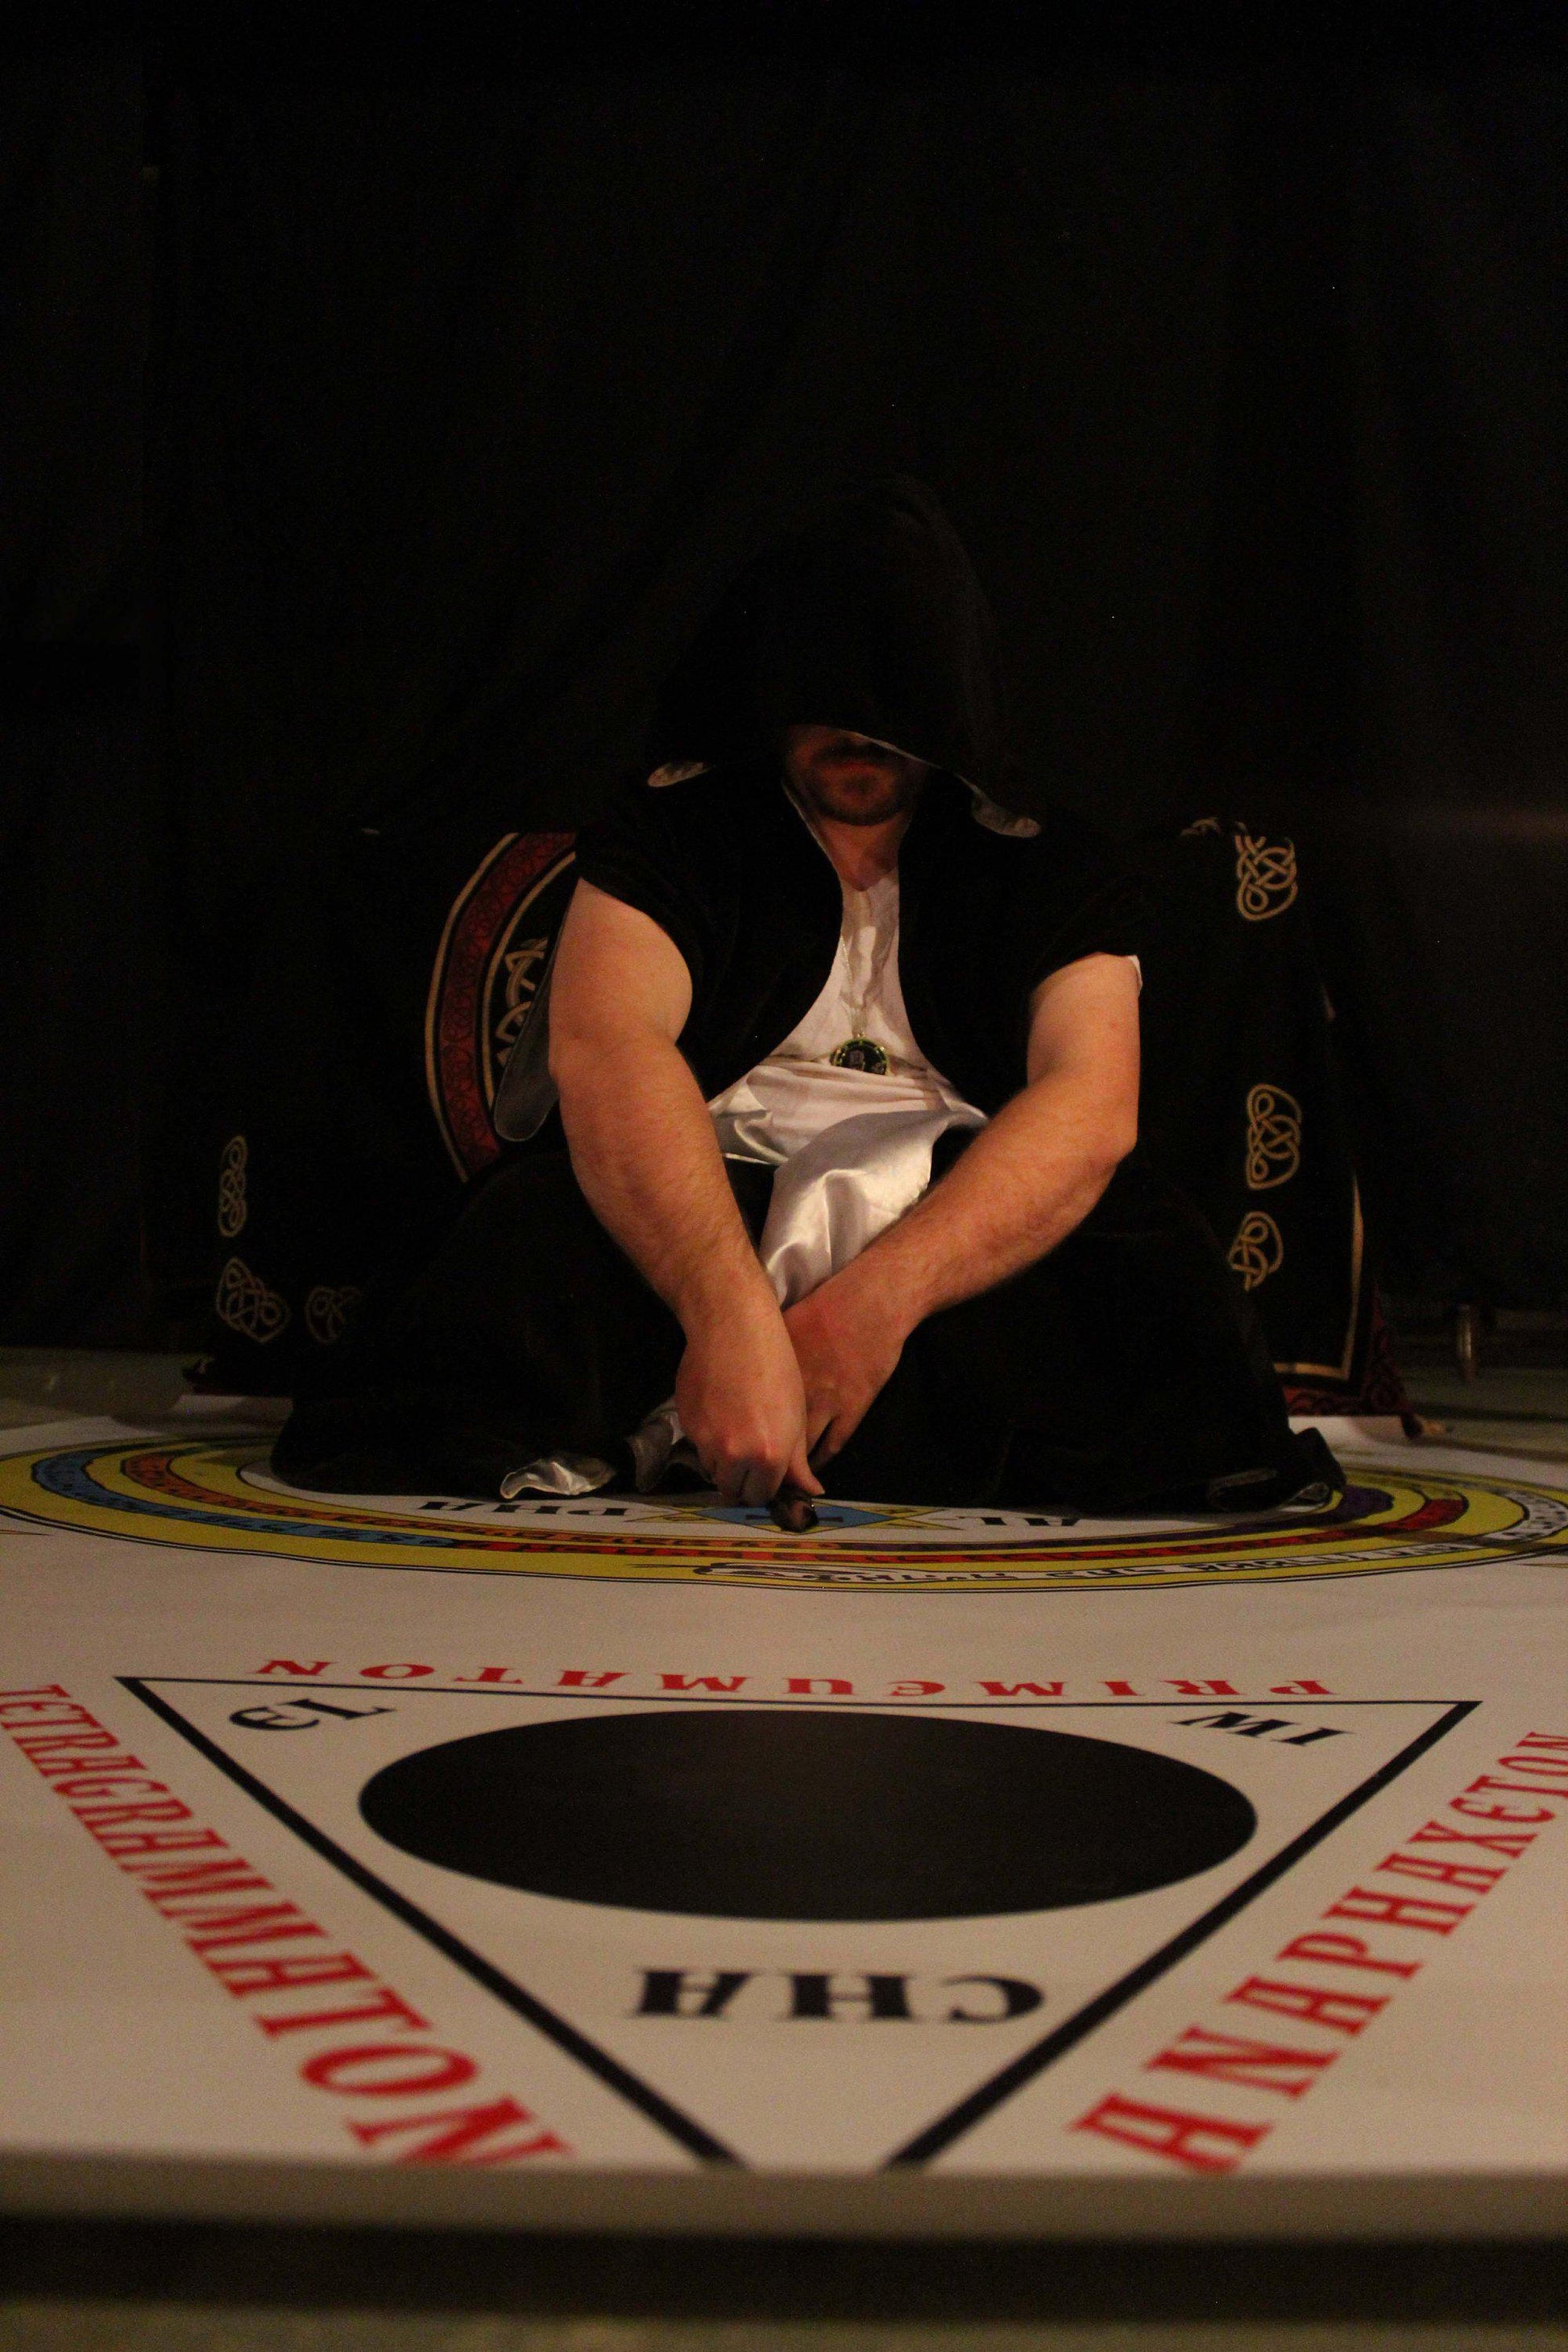 Magician commanding a spirit into the circle of the lesser key of solomon summoning circle mat.